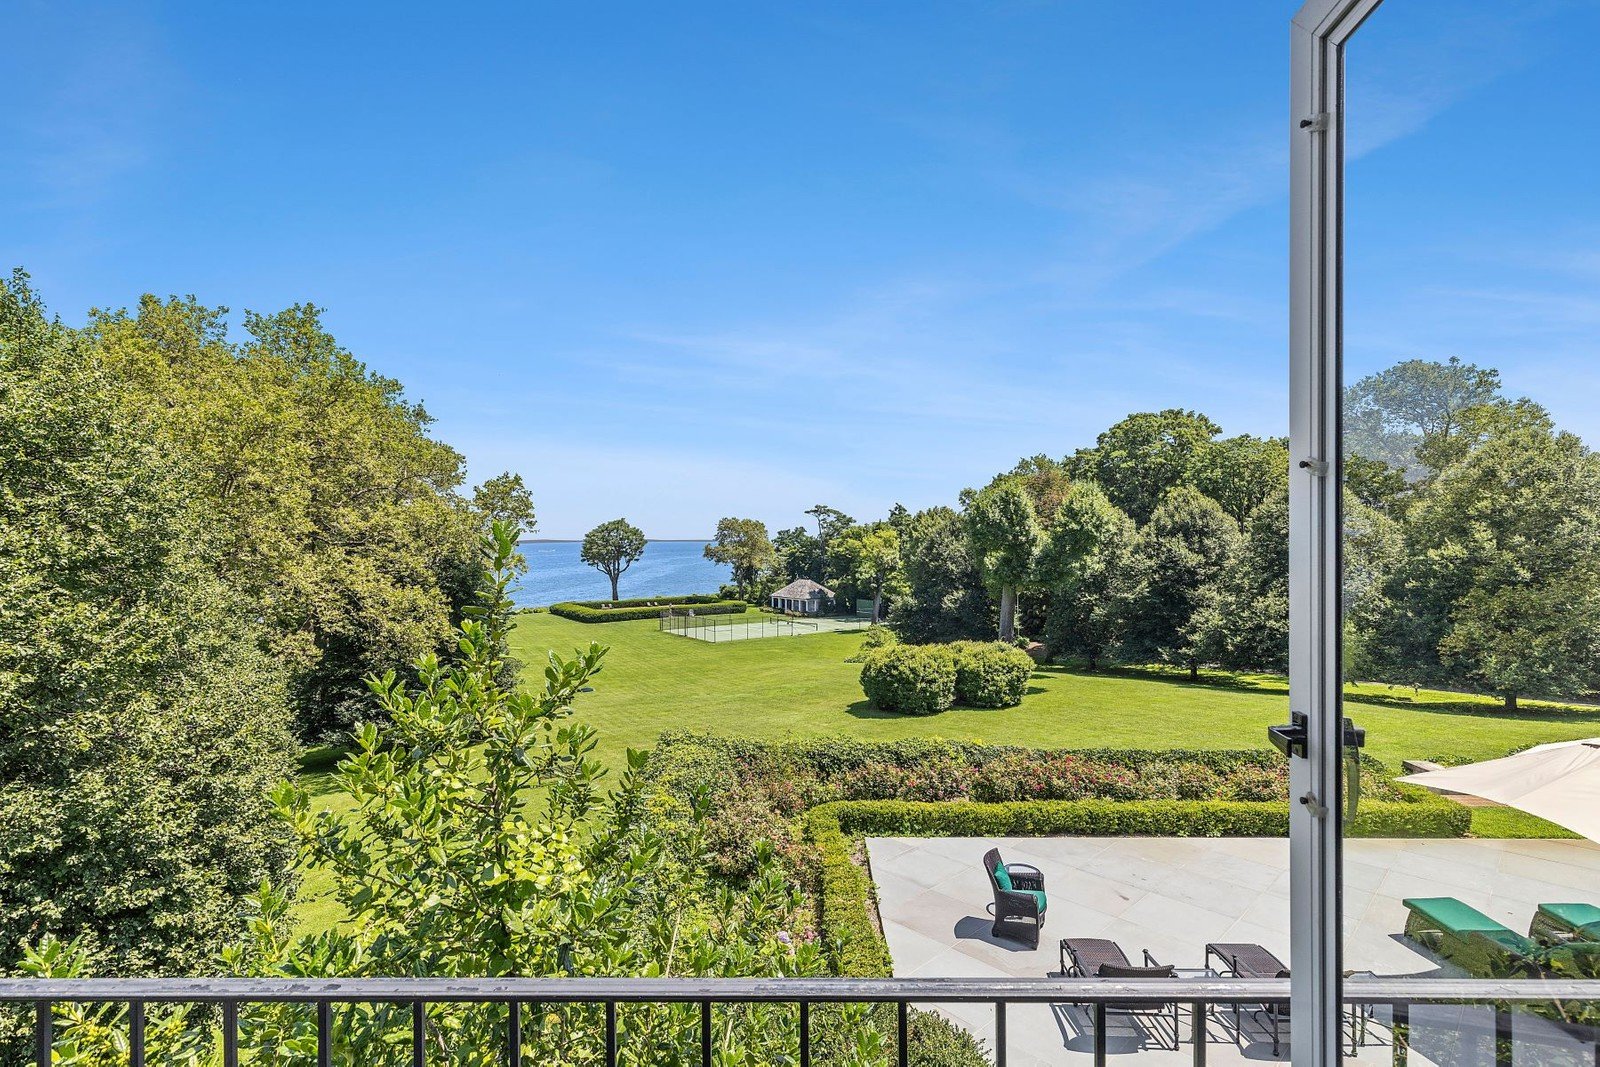 Francis York Daniel Gale Sothebys The Lindens Timeless Long Island Estate Once Home to the Famed Bootleggers, the Vanderbilts, and Rockstars 14.jpeg